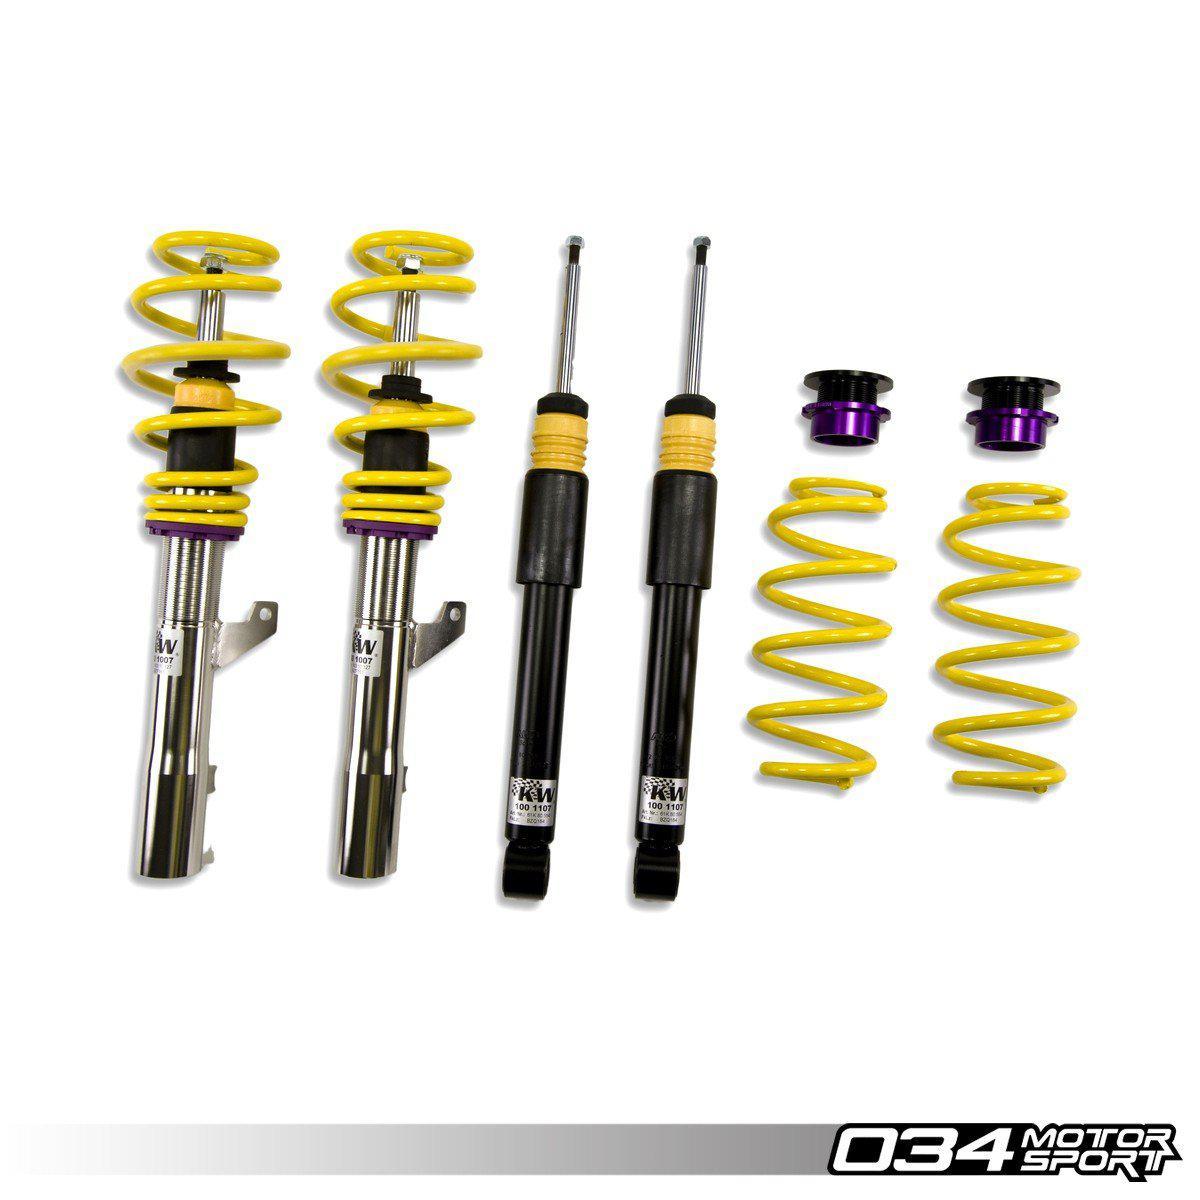 KW Variant 3 Coilover Suspension, MKVII Volkswagen GTI/Golf R With Dcc-A Little Tuning Co